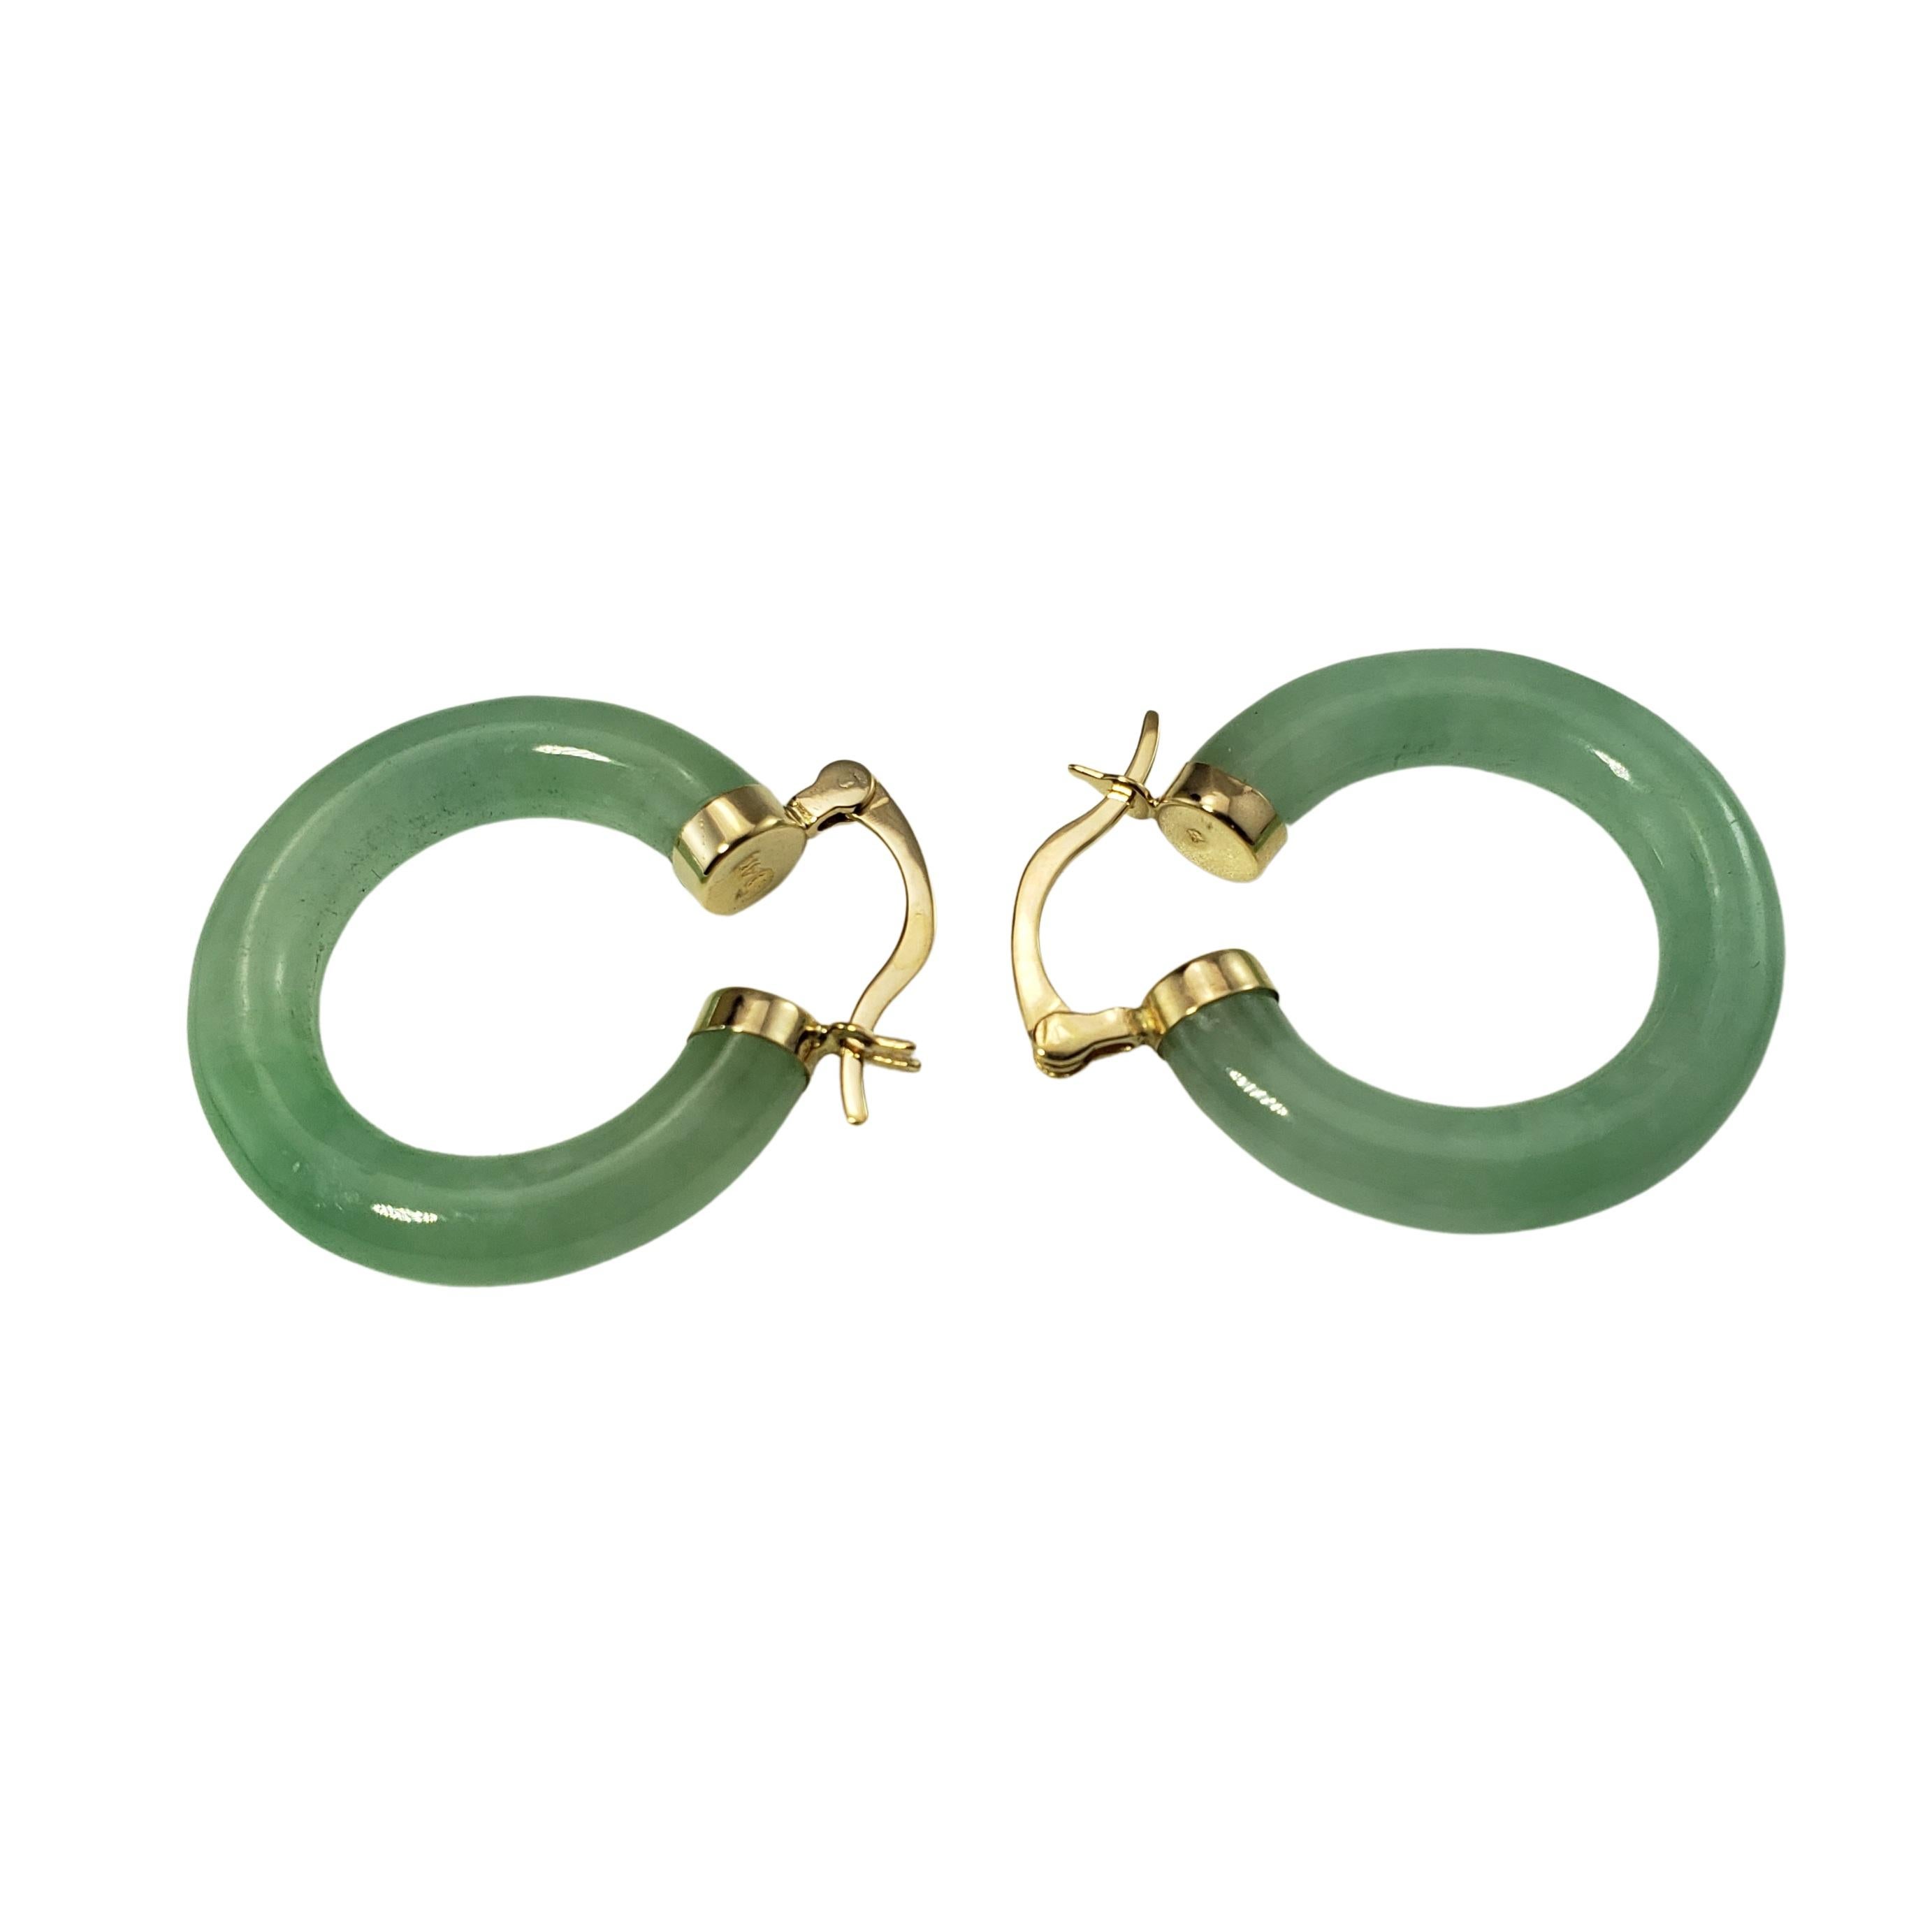 14 Karat Yellow Gold and Jade Hoop Earrings-

These lovely hoop earrings are crafted in beautifully detailed jade and accented with 14K yellow gold closures.  Width:  5 mm.

Size: 25 mm

Weight:  4.6 dwt. /  7.3 gr.

Stamped: 14K

Very good